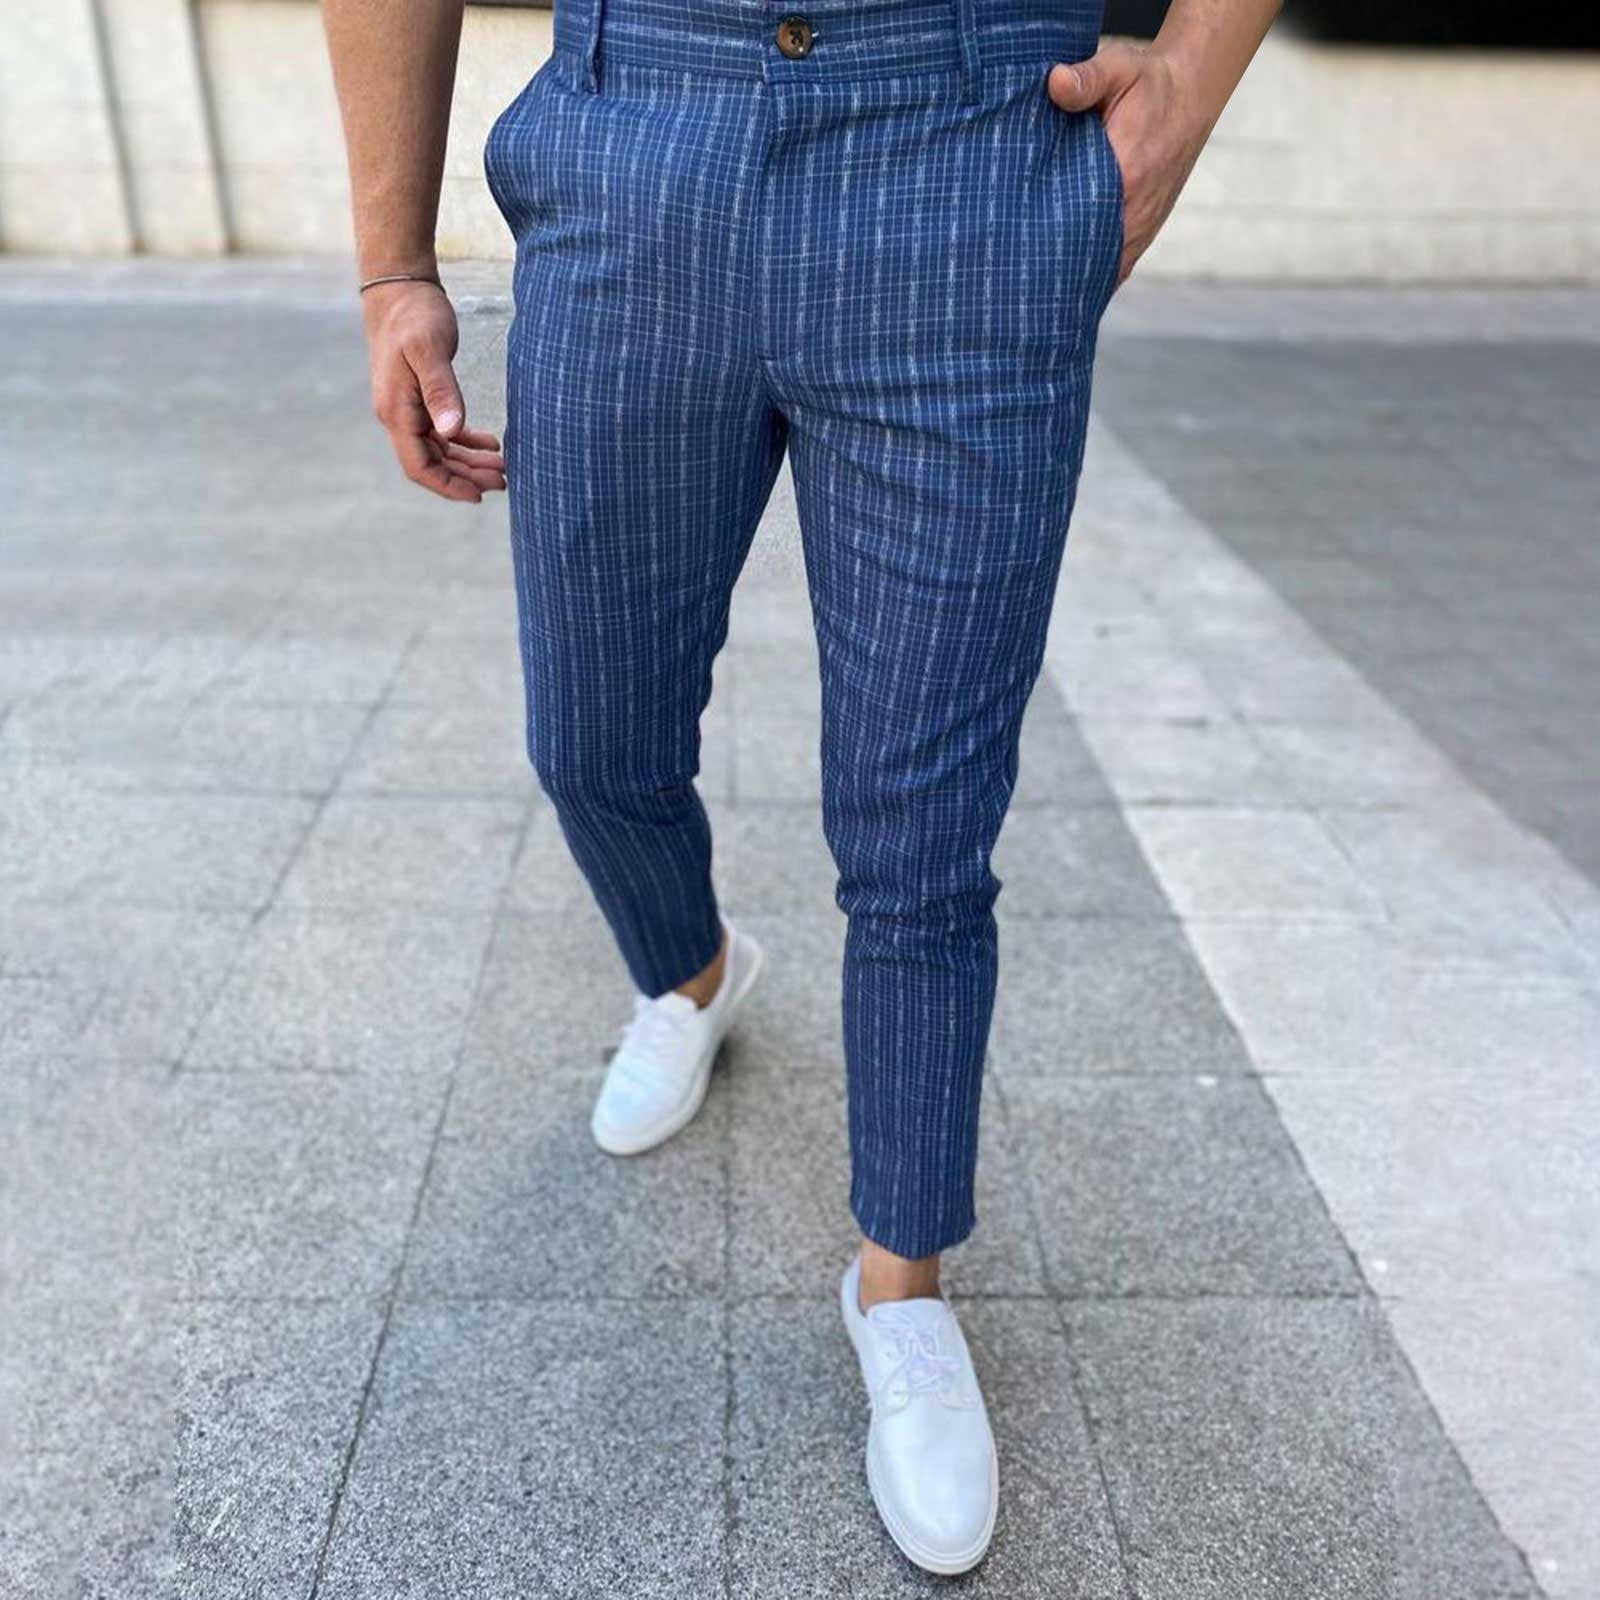 Luxury Men's Formal Striped Pants Slim Fit Casual Business Office Long  Trousers Smart Casual Pencil Pants New 2019 Autumn Winter - Kilimall |  Flutterwave Store